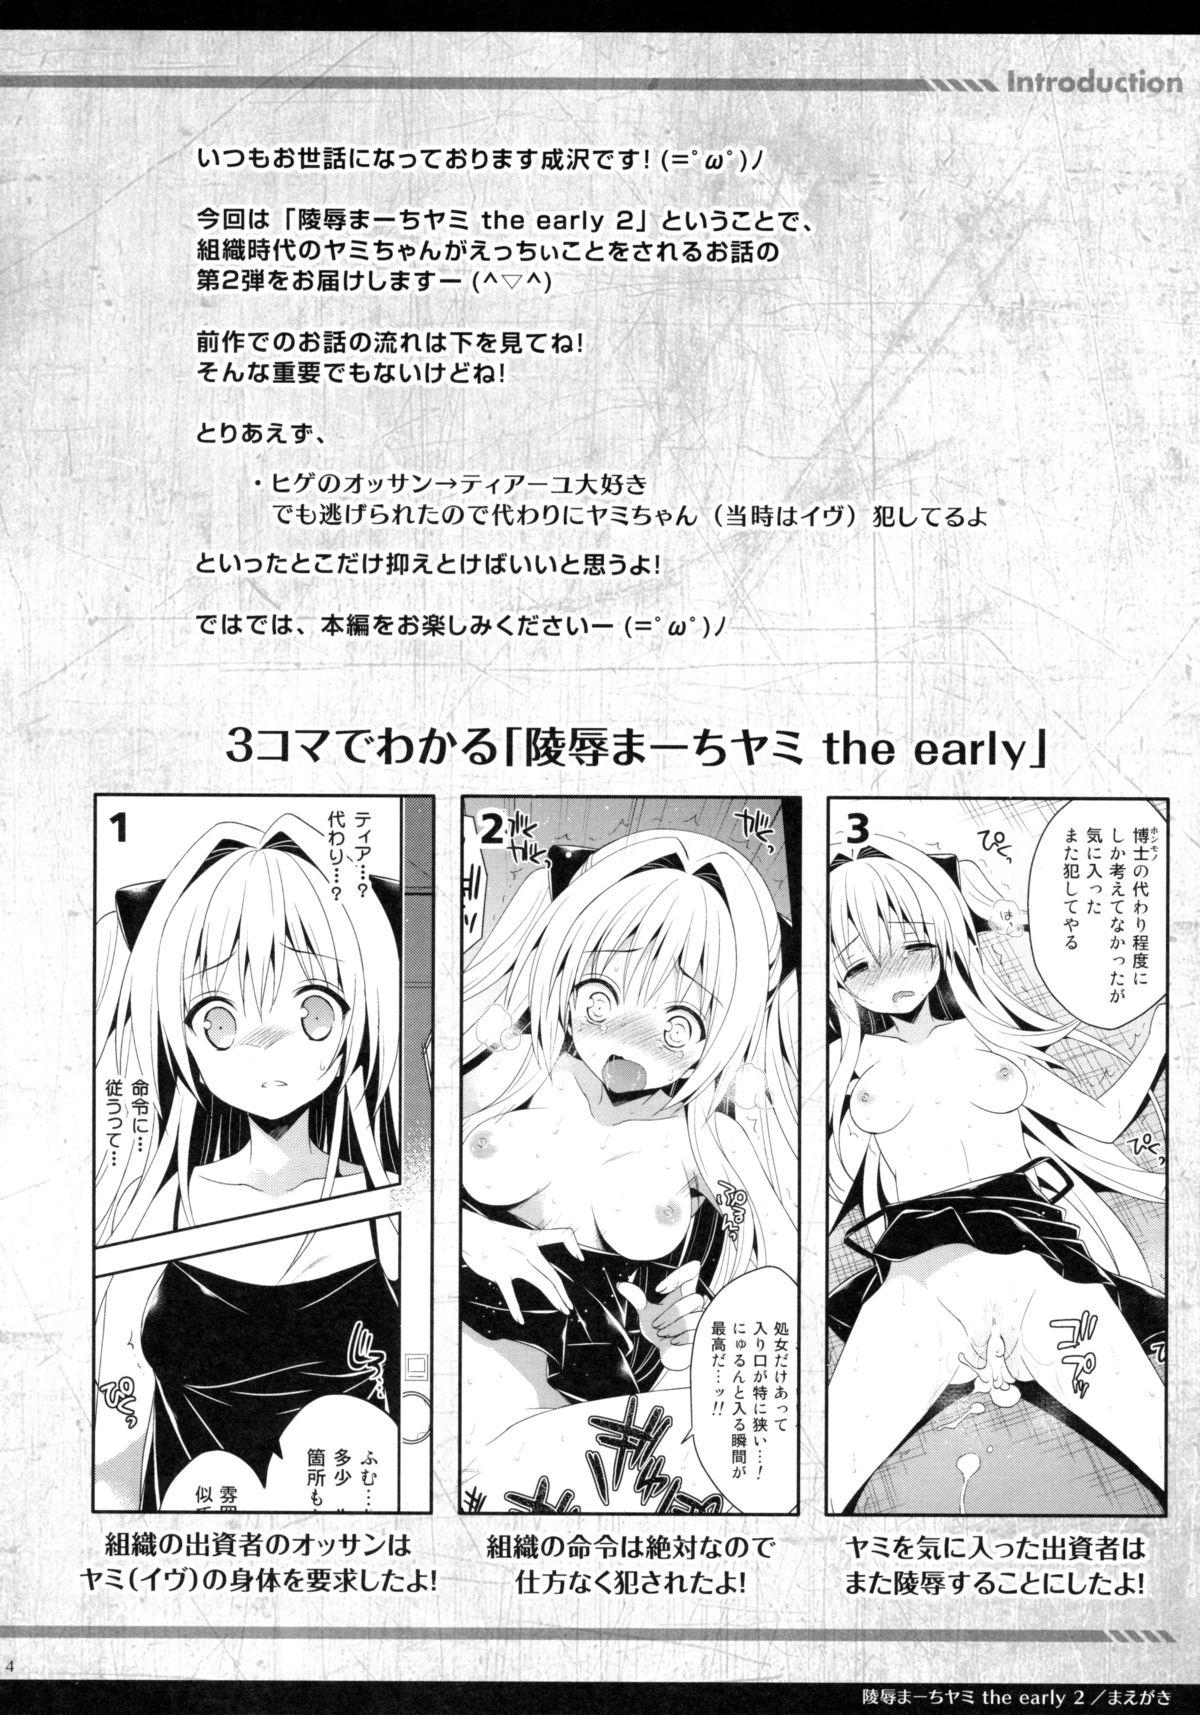 Dicks Ryoujoku March Yami the early 2 - To love ru Gay Domination - Page 4